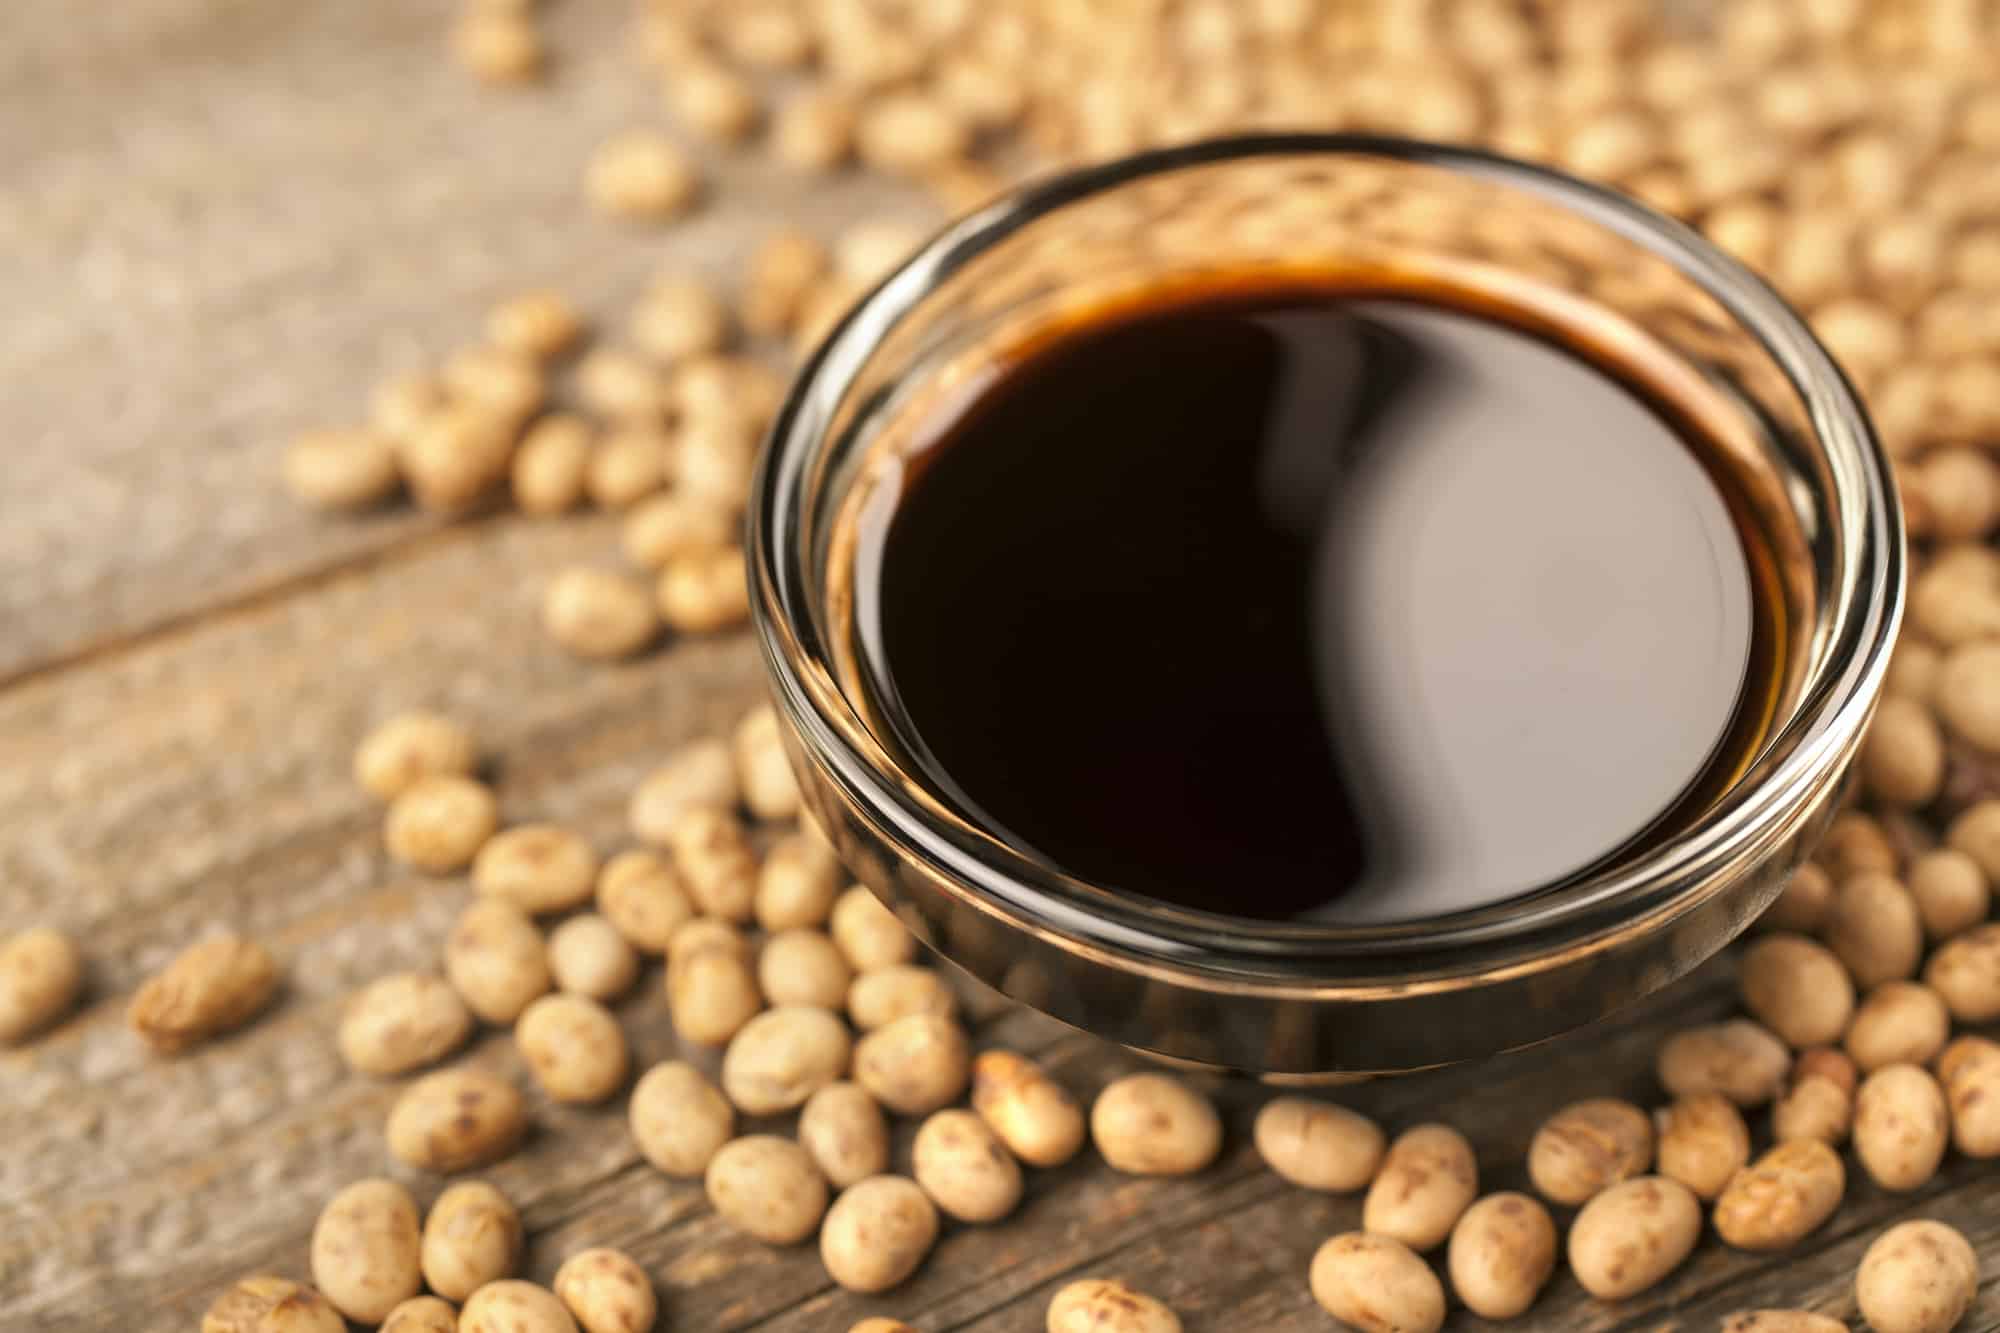 Soy Sauce: The Most Important Chinese Condiment